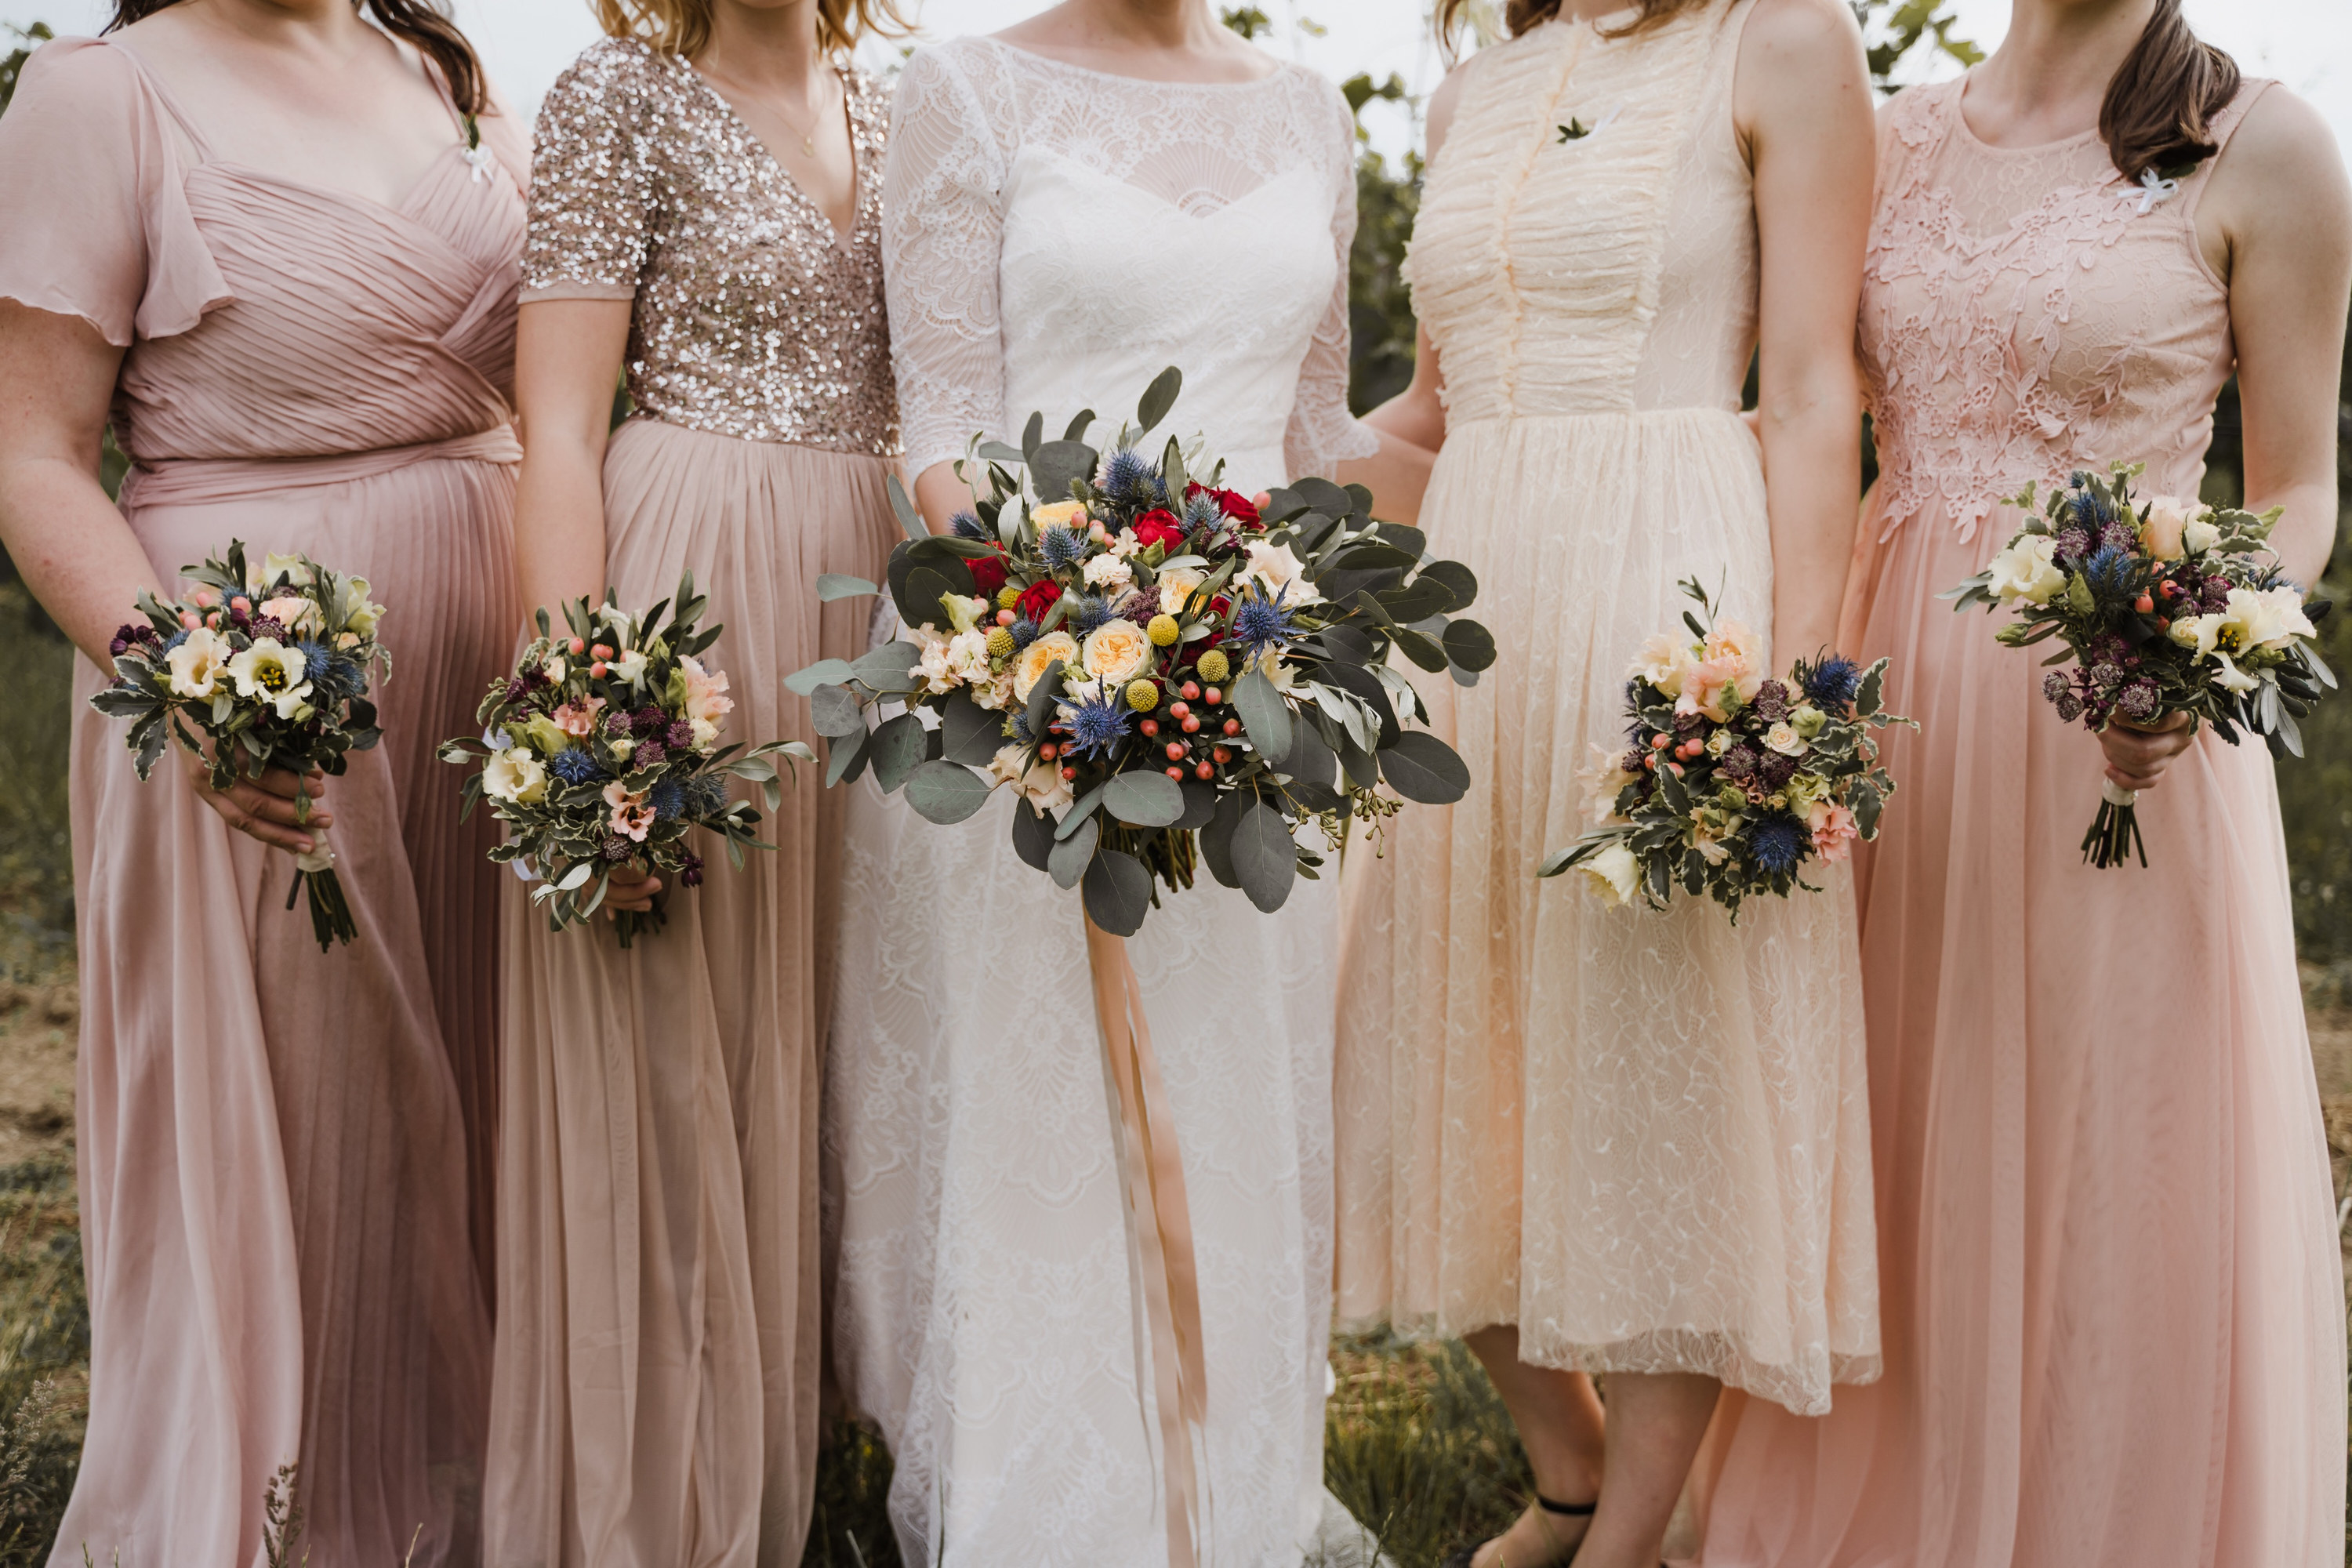 A bridal party posing for pictures with the bride